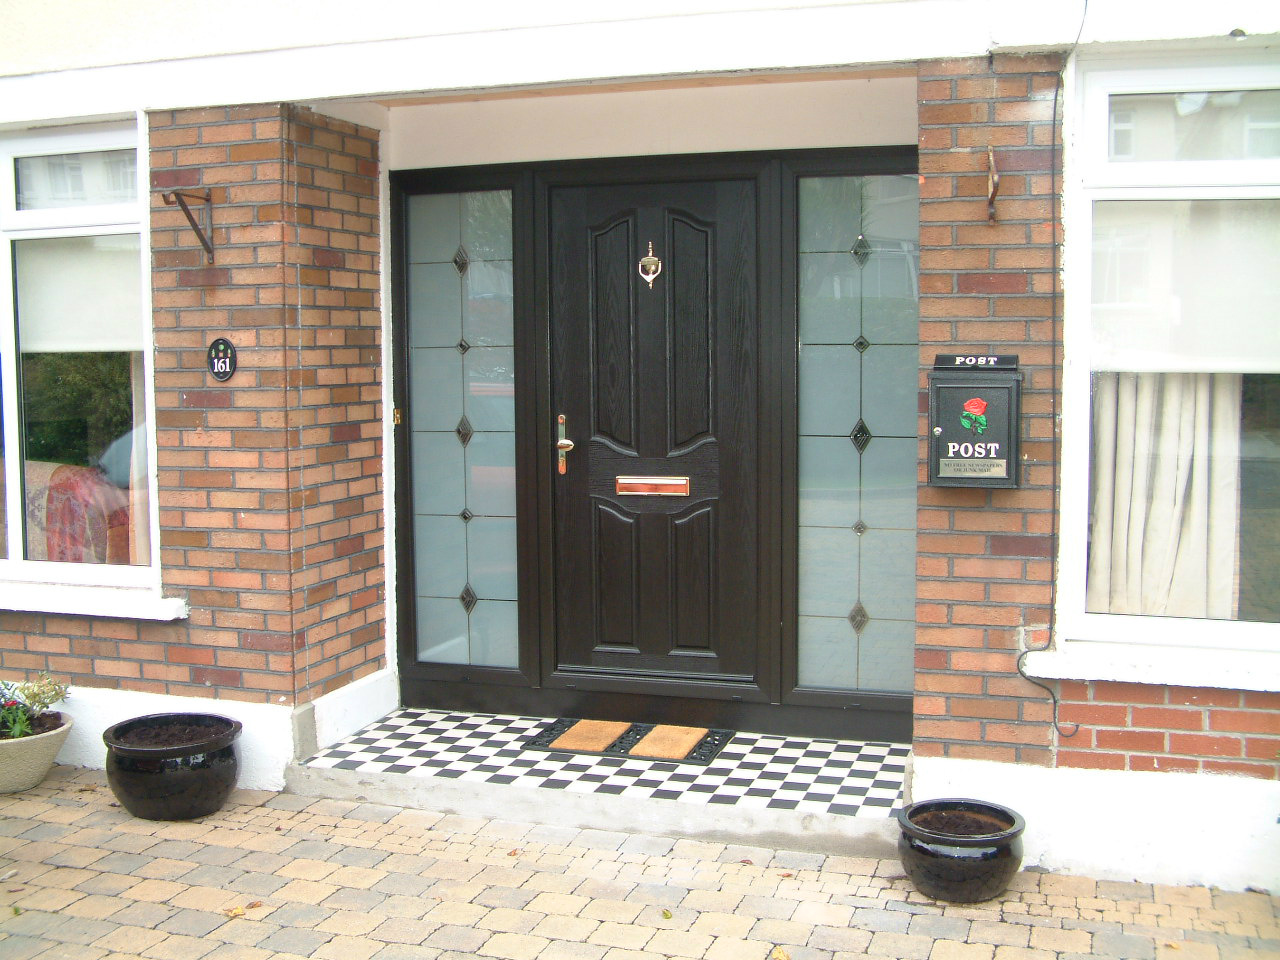 BLACK APEER APL1 COMPOSITE FRONT DOOR FITTED BY ASGARD WINDOWS IN DUBLIN.